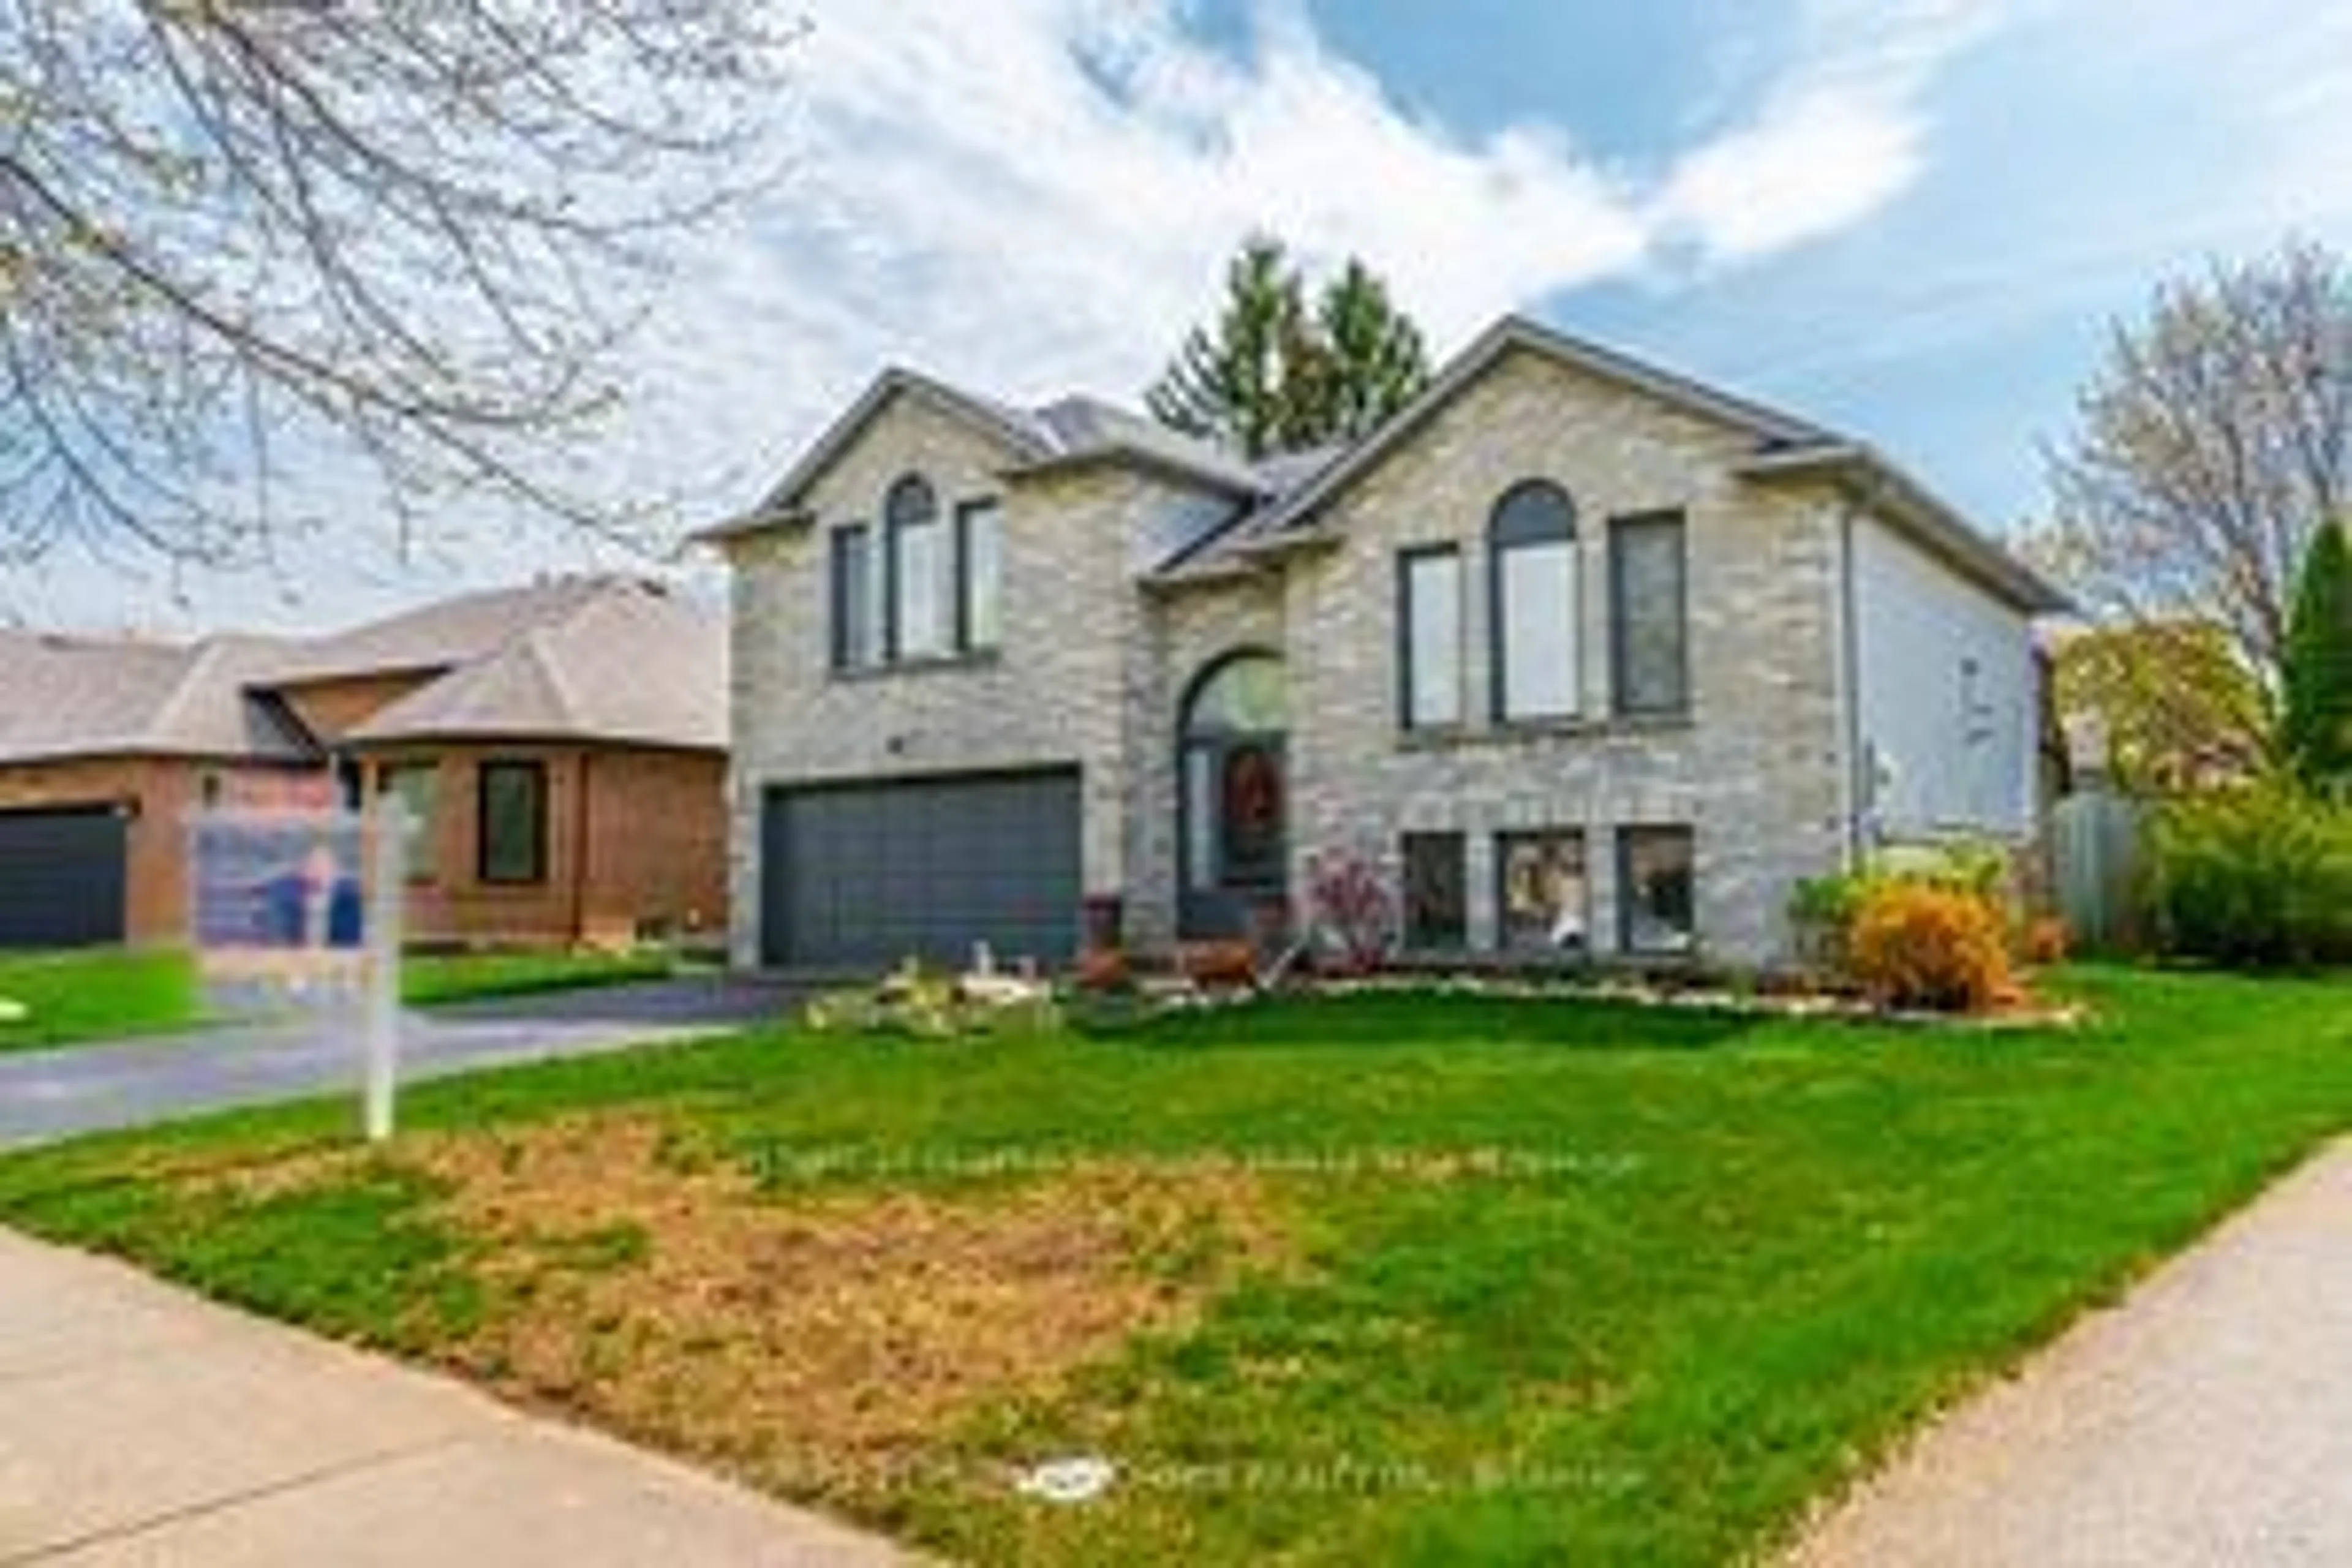 Home with brick exterior material for 1226 Oxford Ave, Oakville Ontario L6H 1S5